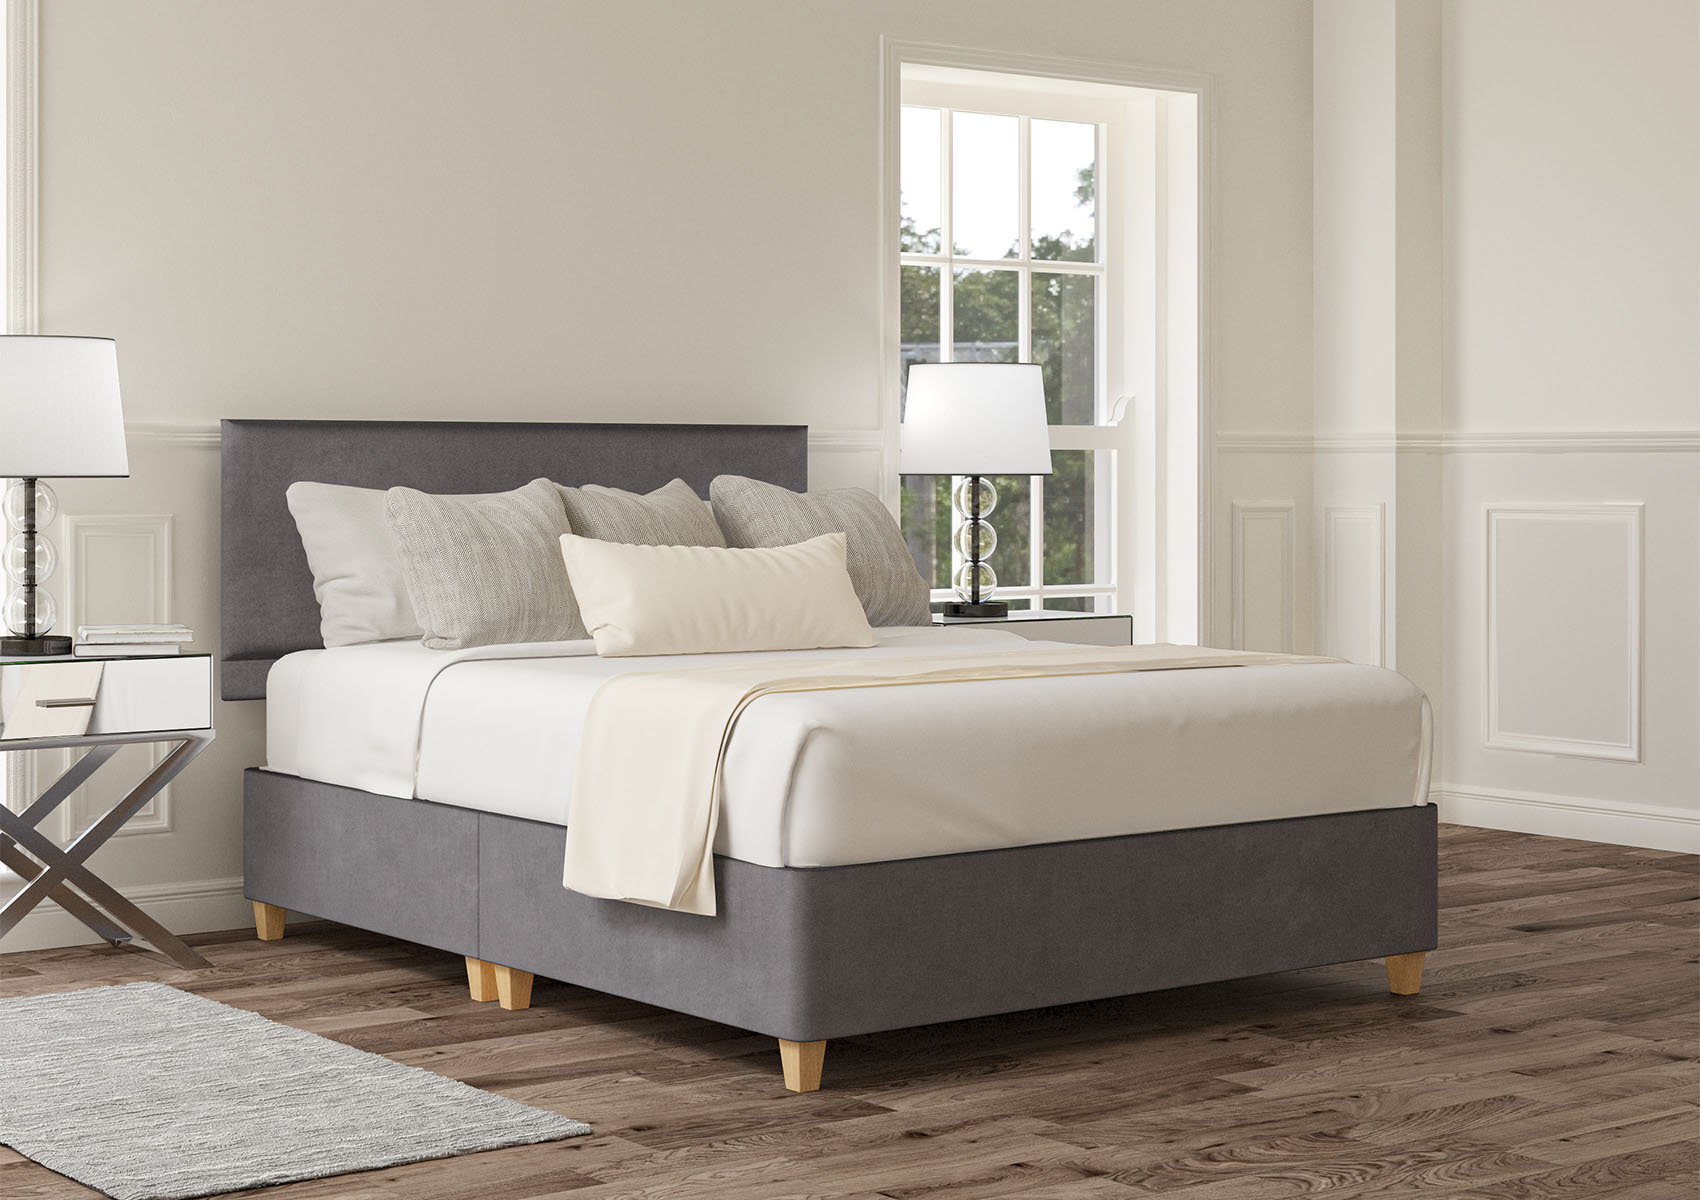 View Henley Naples Cream Upholstered Double Bed Time4Sleep information